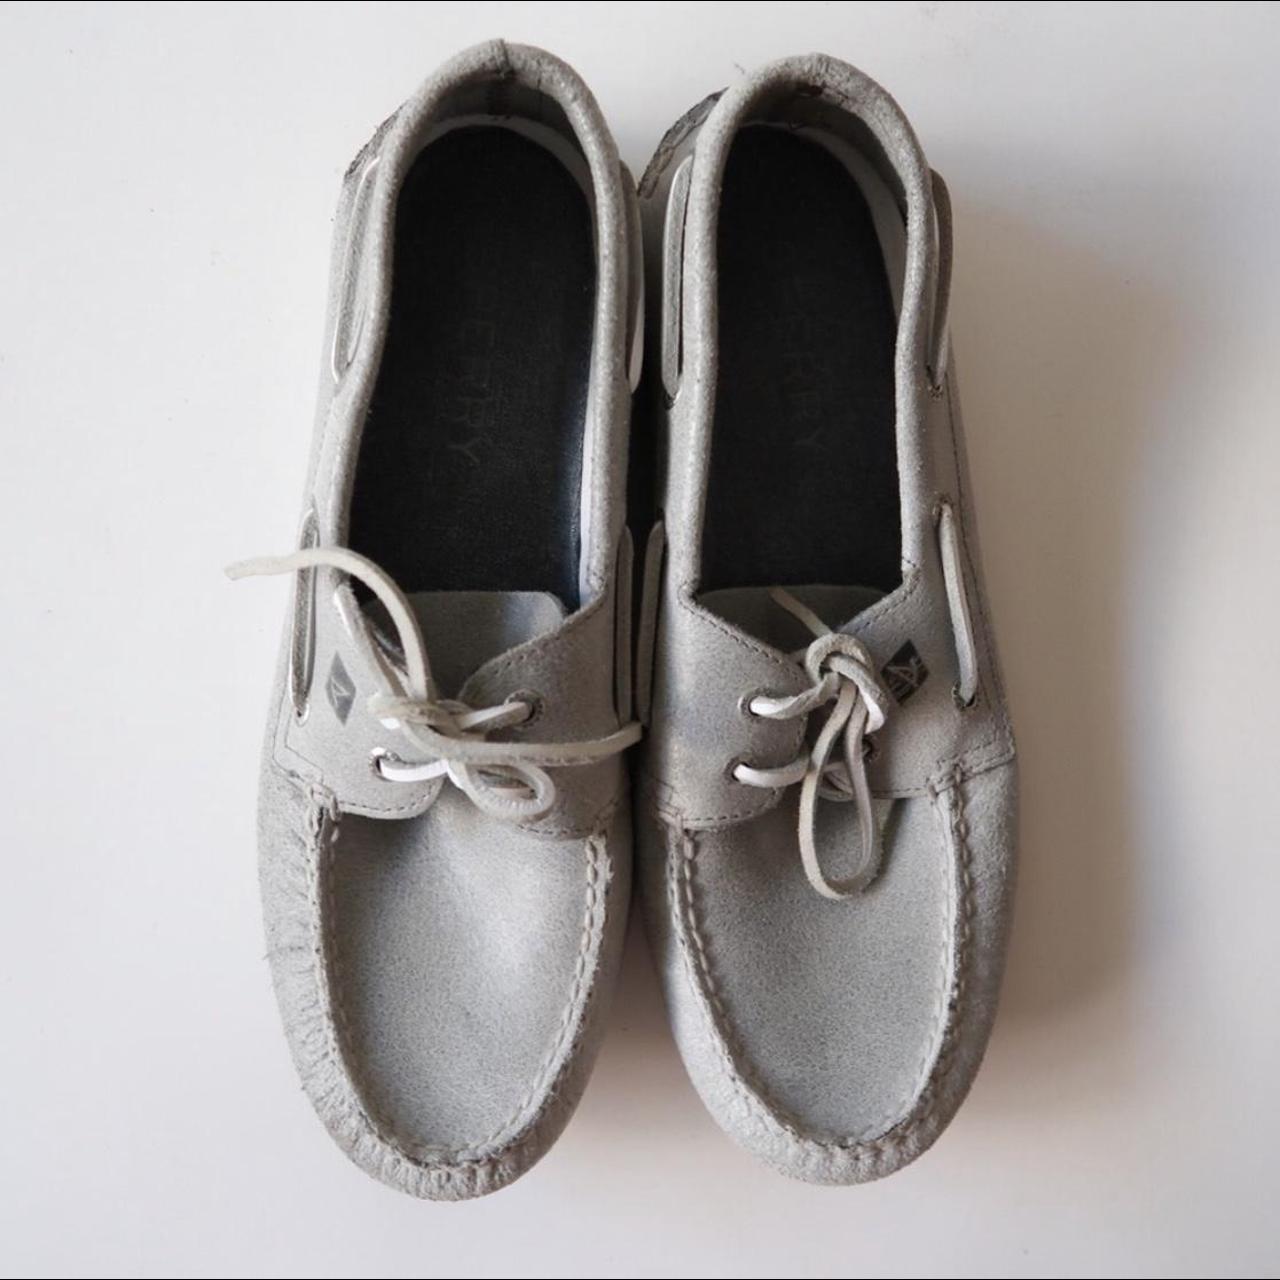 Product Image 1 - Sperry Topsider Boat Shoes
Size 10